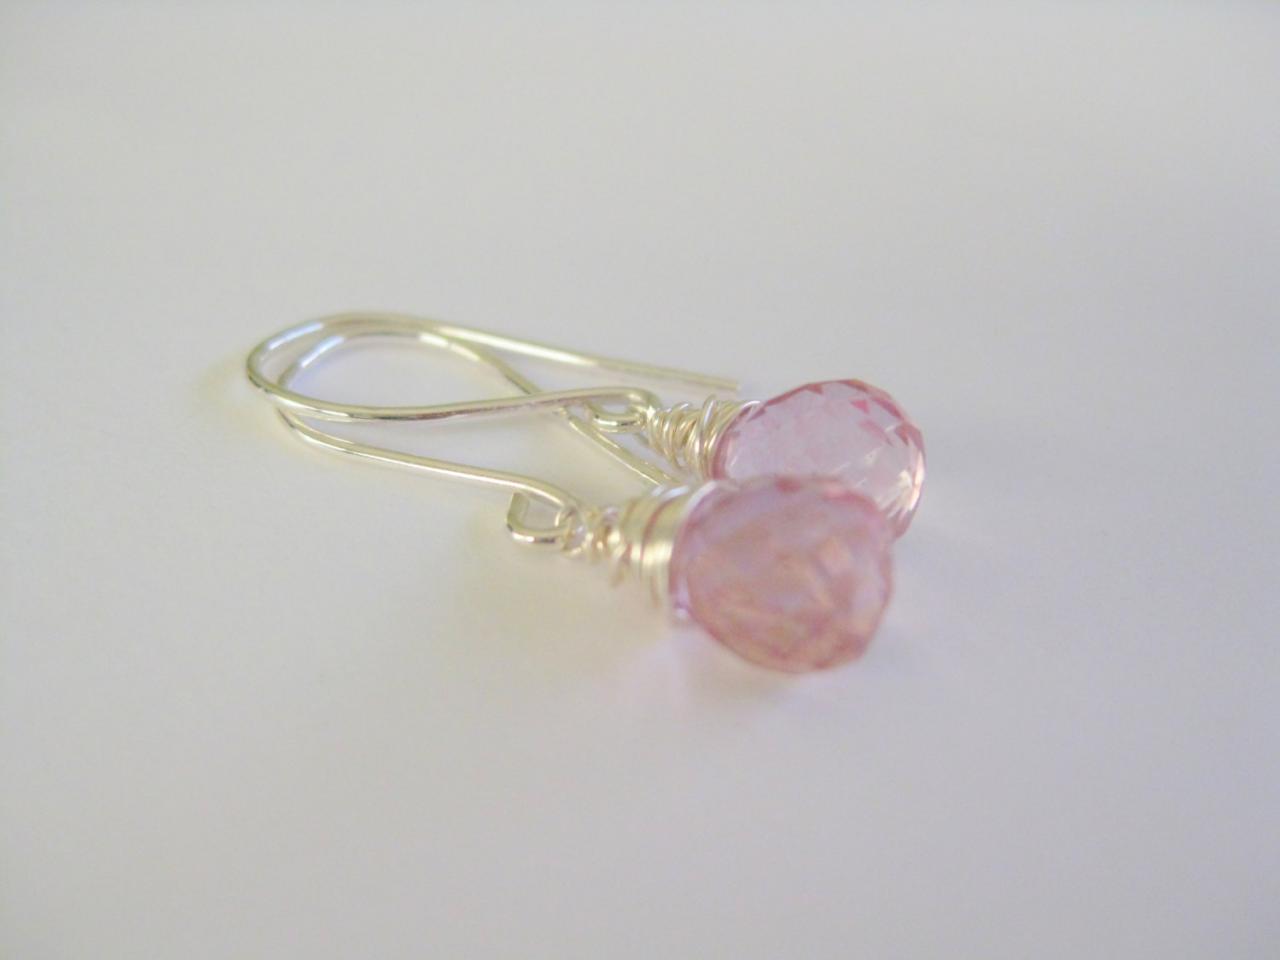 Sterling Silver Wrapped Pink Mystic Quartz Gemstone Dangle Earrings. Simple Everyday Or Wedding Party Earrings.